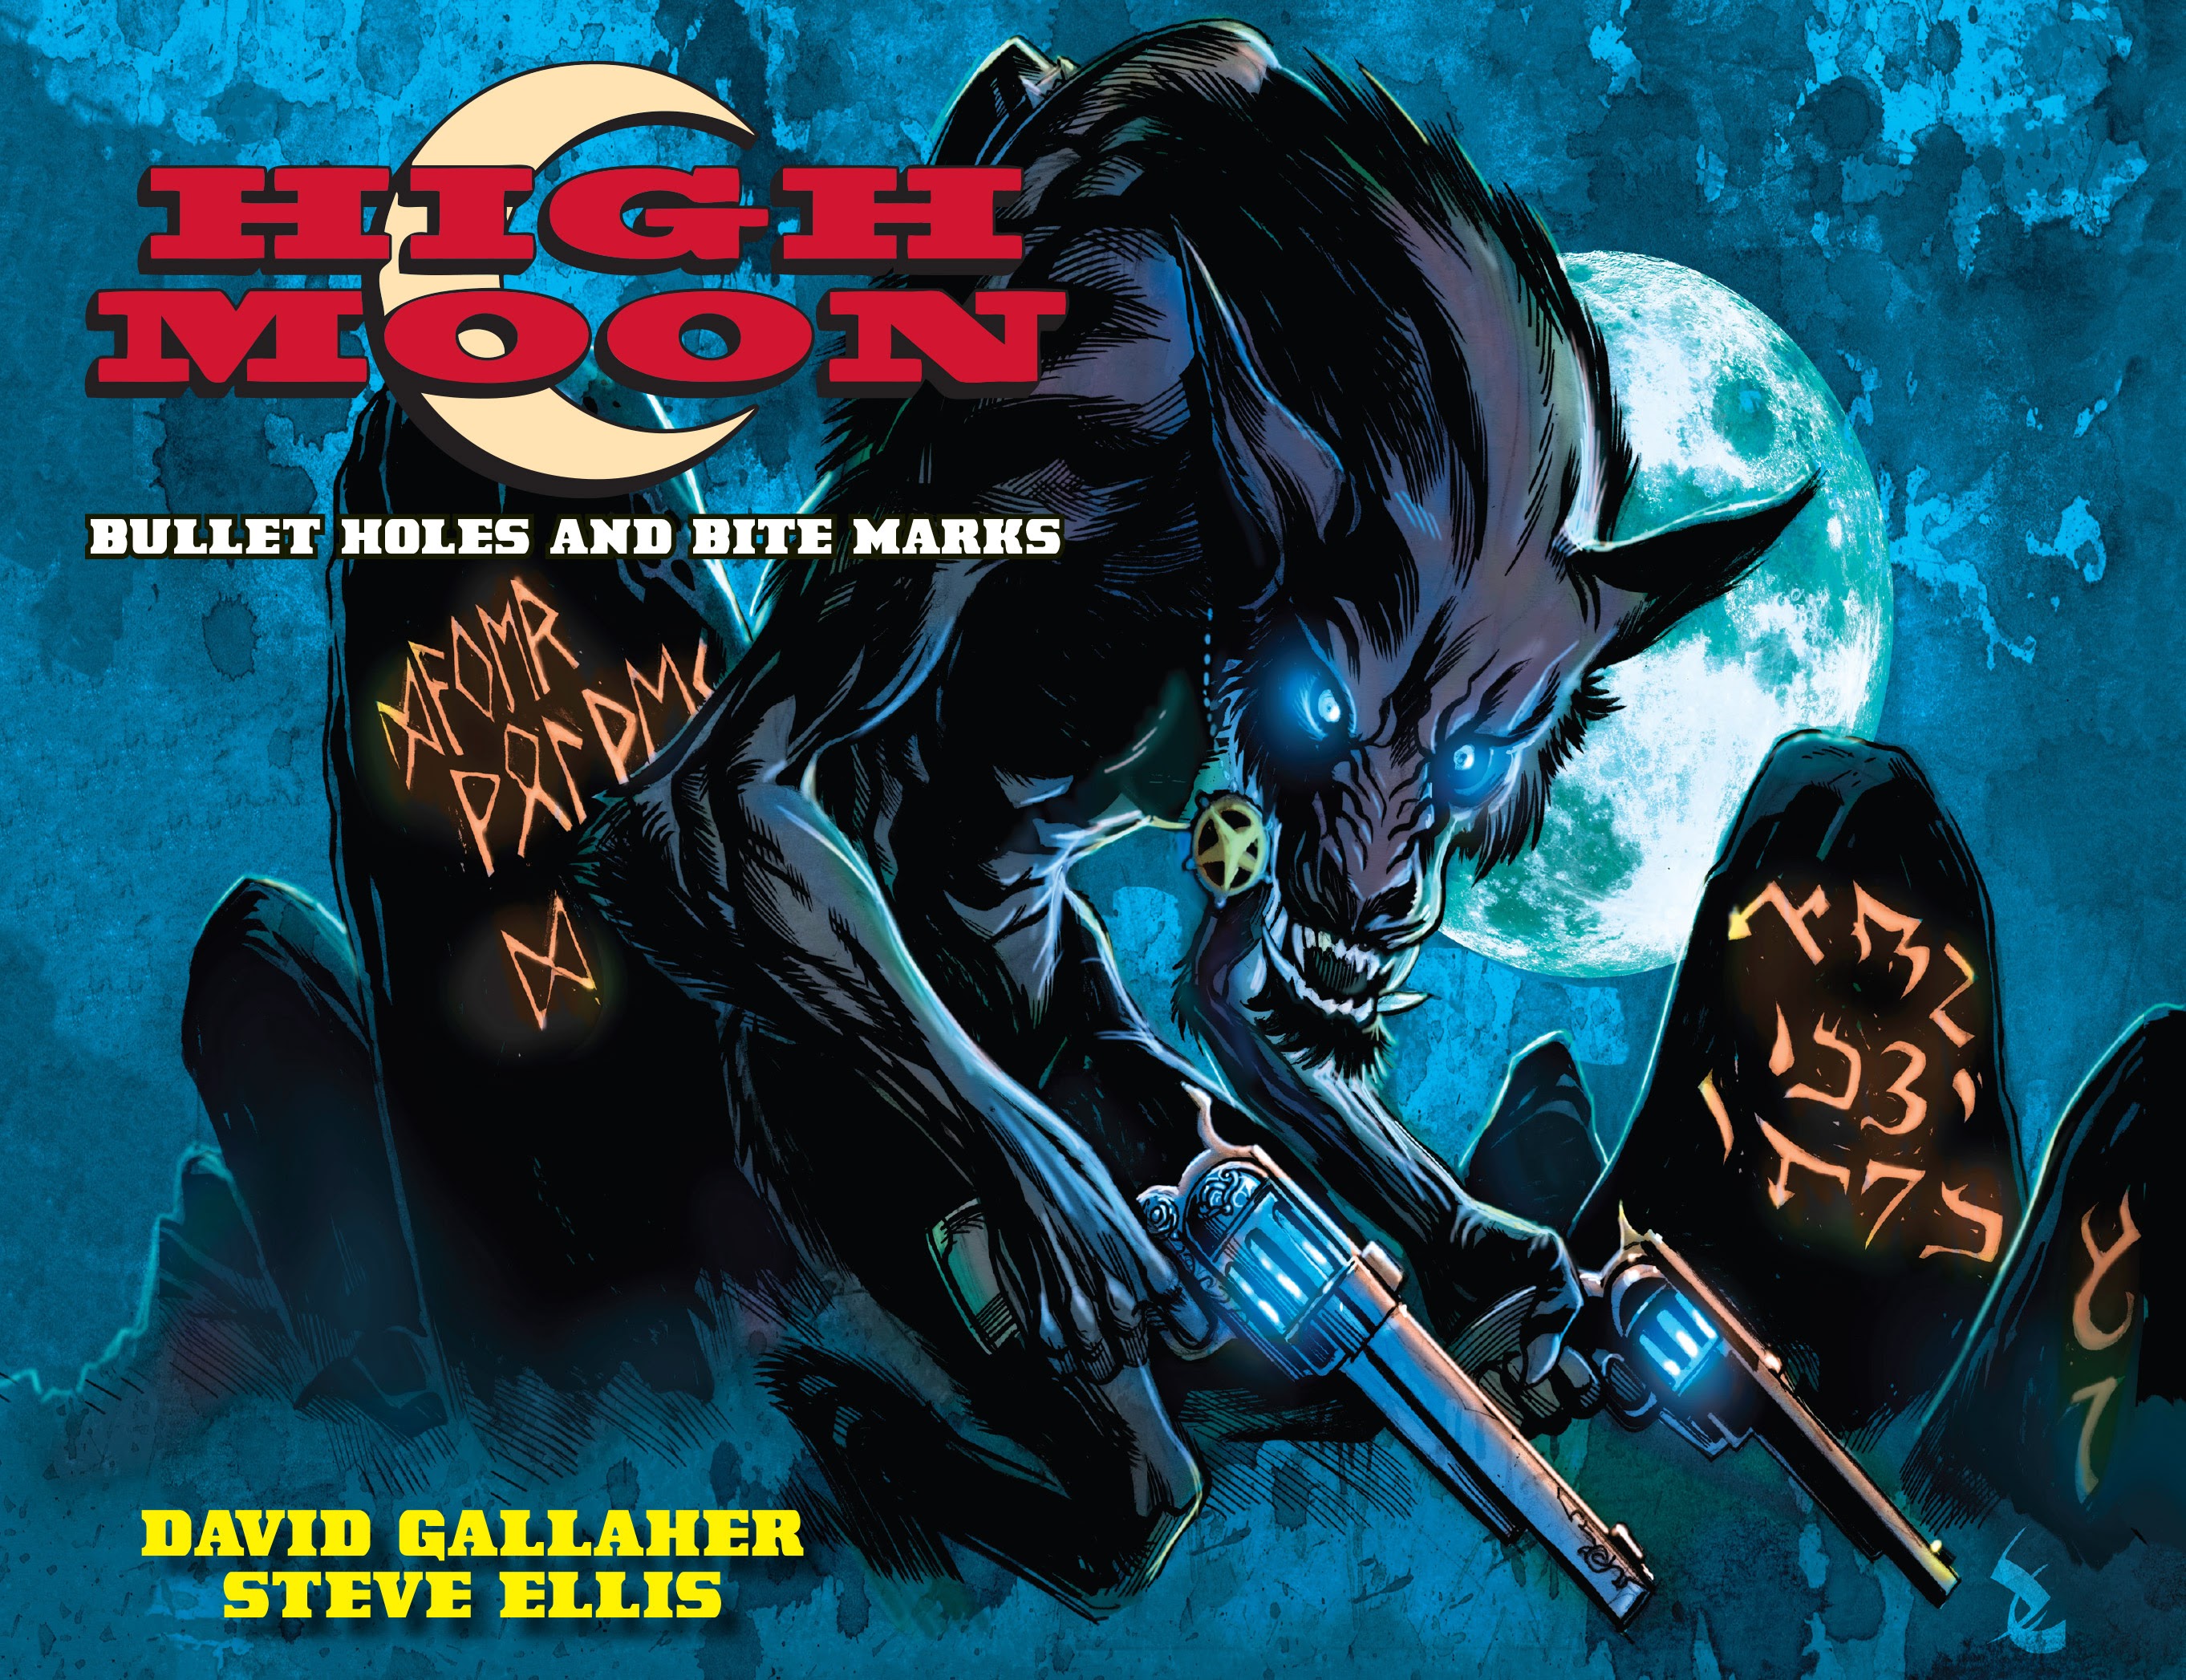 Read online High Moon comic -  Issue # TPB - 1